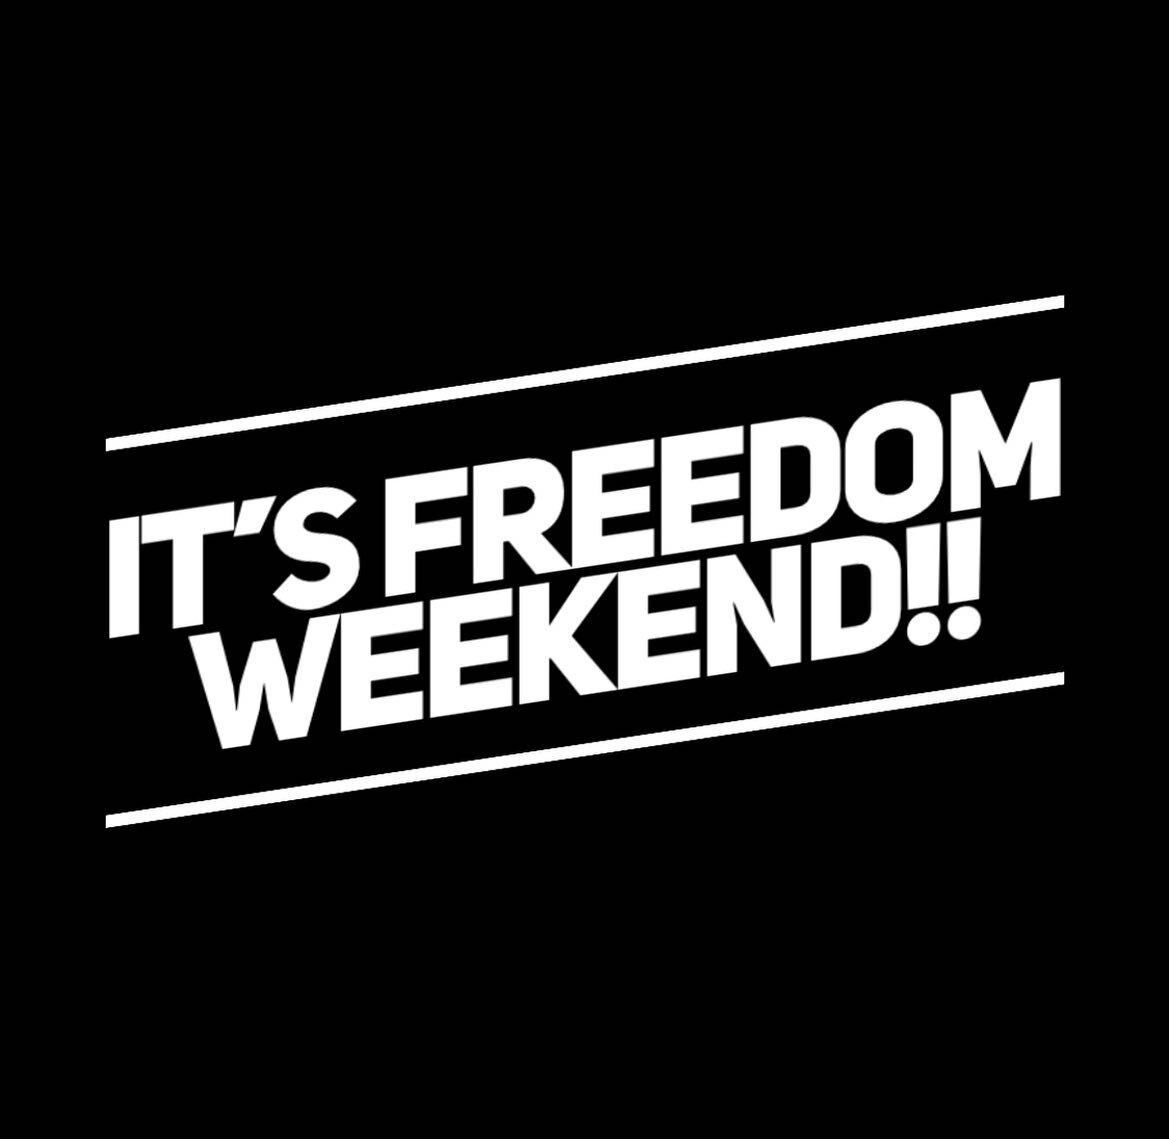 It&rsquo;s FREEDOM Weekend!!! 🔥🔥🔥🙏🏻🙏🏻🙏🏻🙏🏻🤜🏻👹🤜🏻👹🤜🏻👹